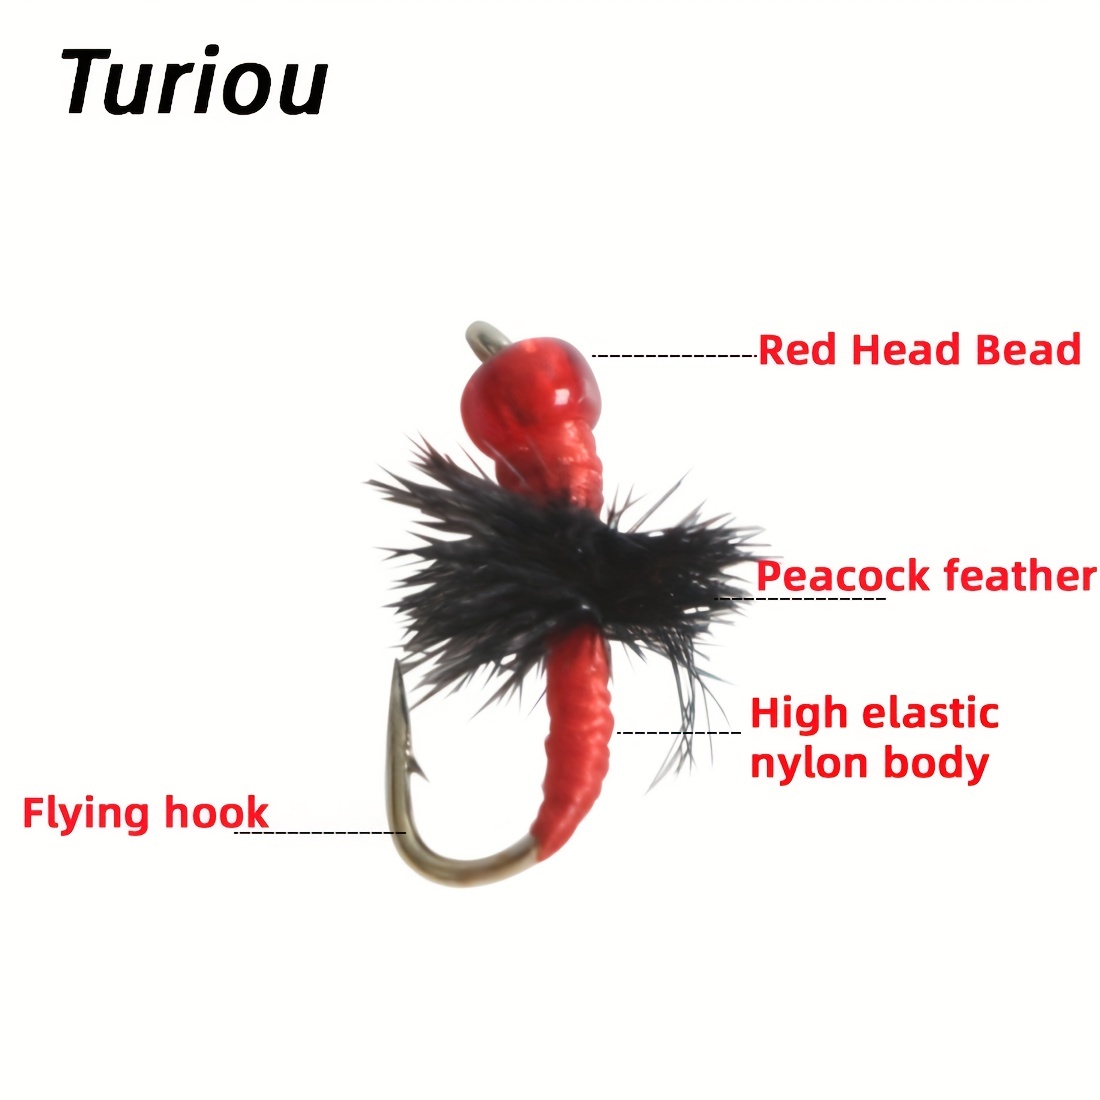 20pcs/box Premium Topwater Popper Fly Lures for Bass, Trout, and Salmon  Fishing - Realistic Insect Streamer Design for Maximum Attraction